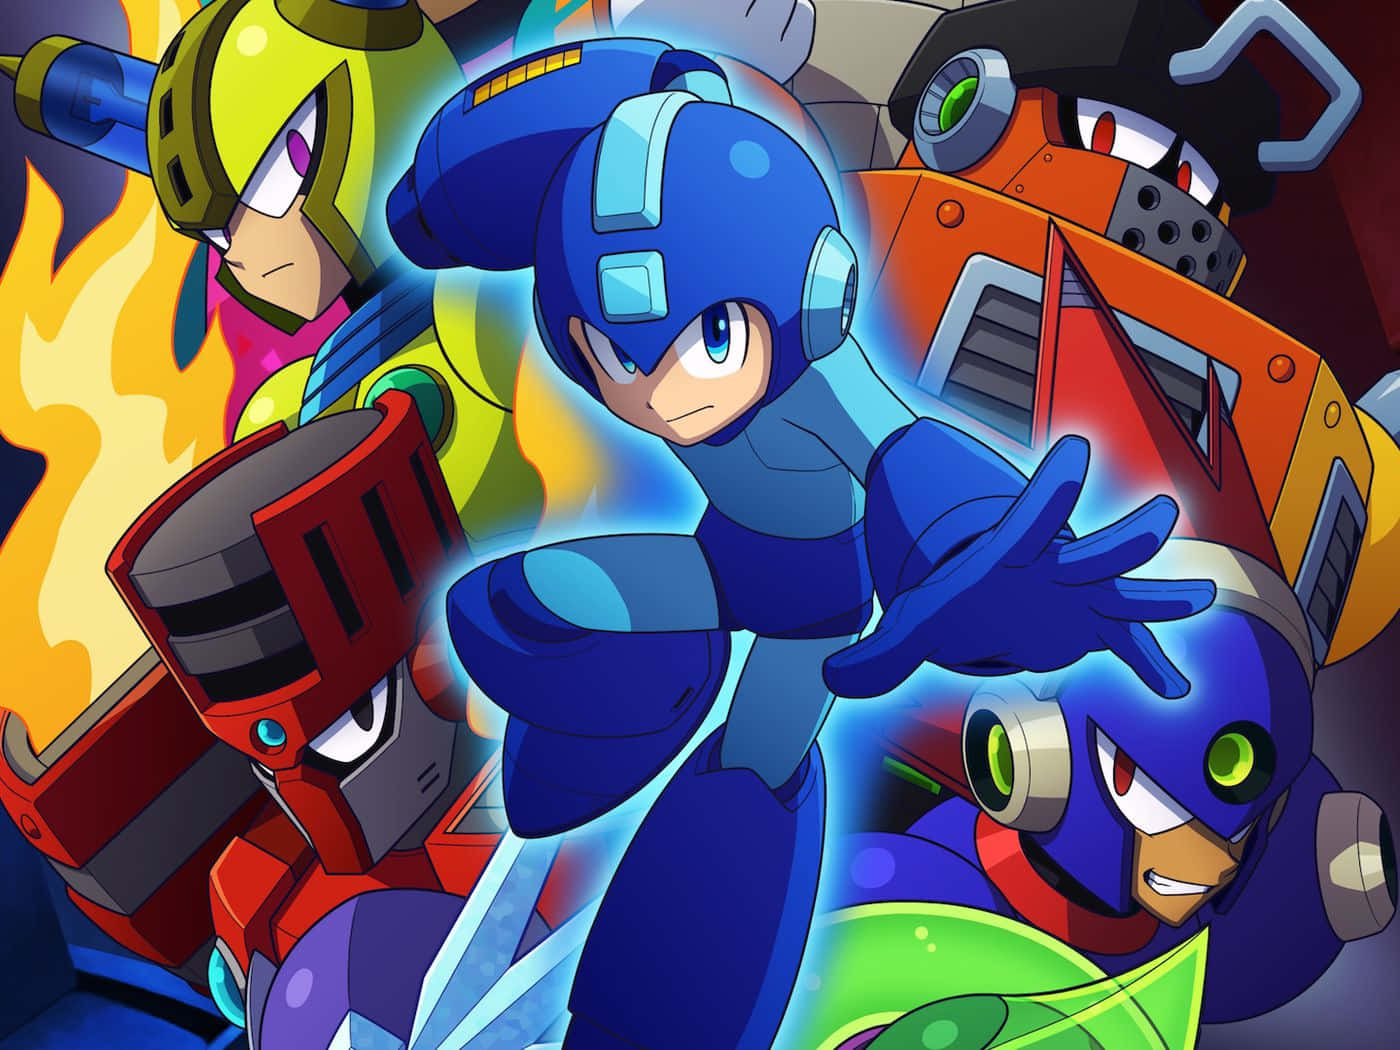 Megaman in the pursuit of justice.